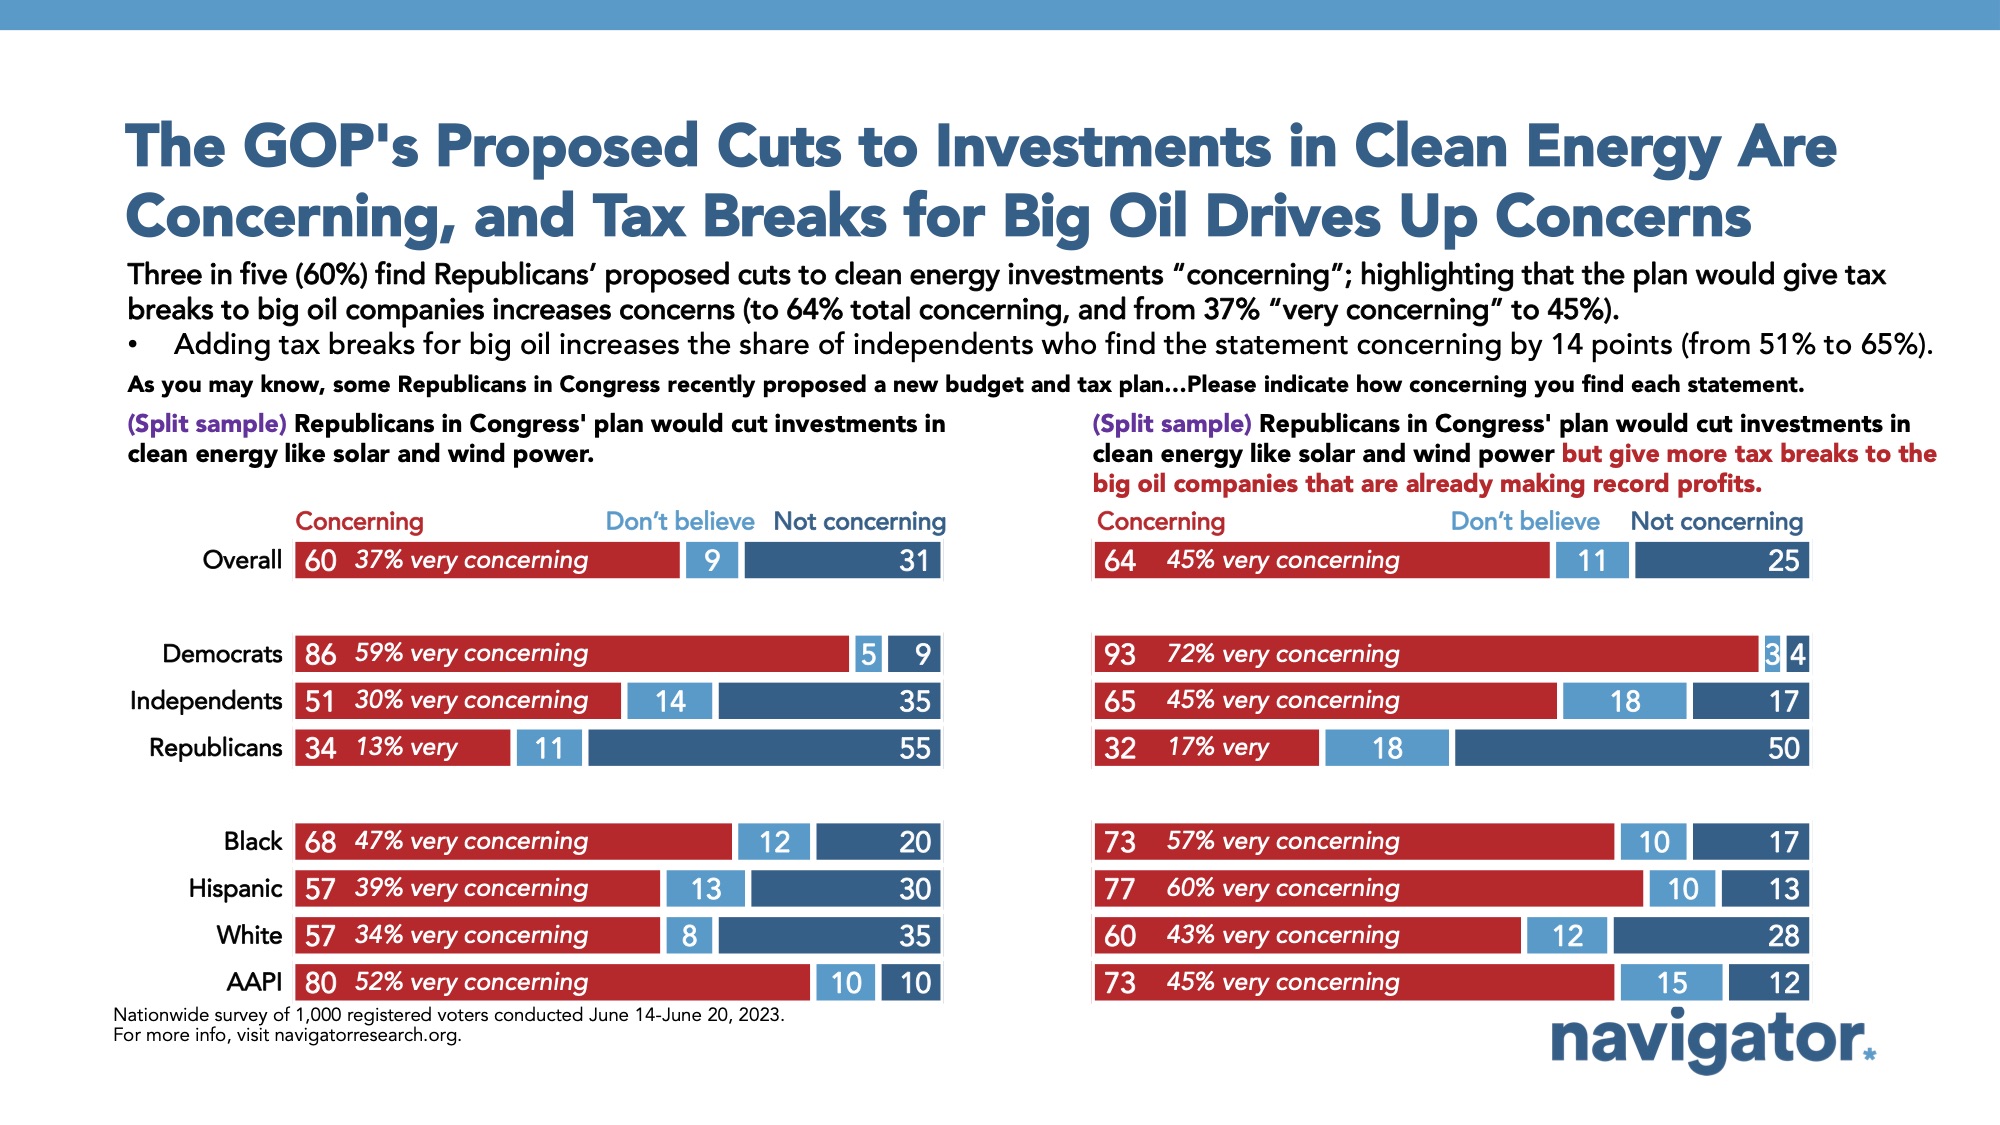 Survey results to the following prompts (split sample): As you may know, some Republicans in Congress recently proposed a new budget and tax plan...Please indicate how concerning you find each statement. a. Republicans in Congress' plan would cut investments in clean energy like solar and wind power. b. (Split sample) Republicans in Congress' plan would cut investments in clean energy like solar and wind power but give more tax breaks to the big oil companies that are already making record profits.